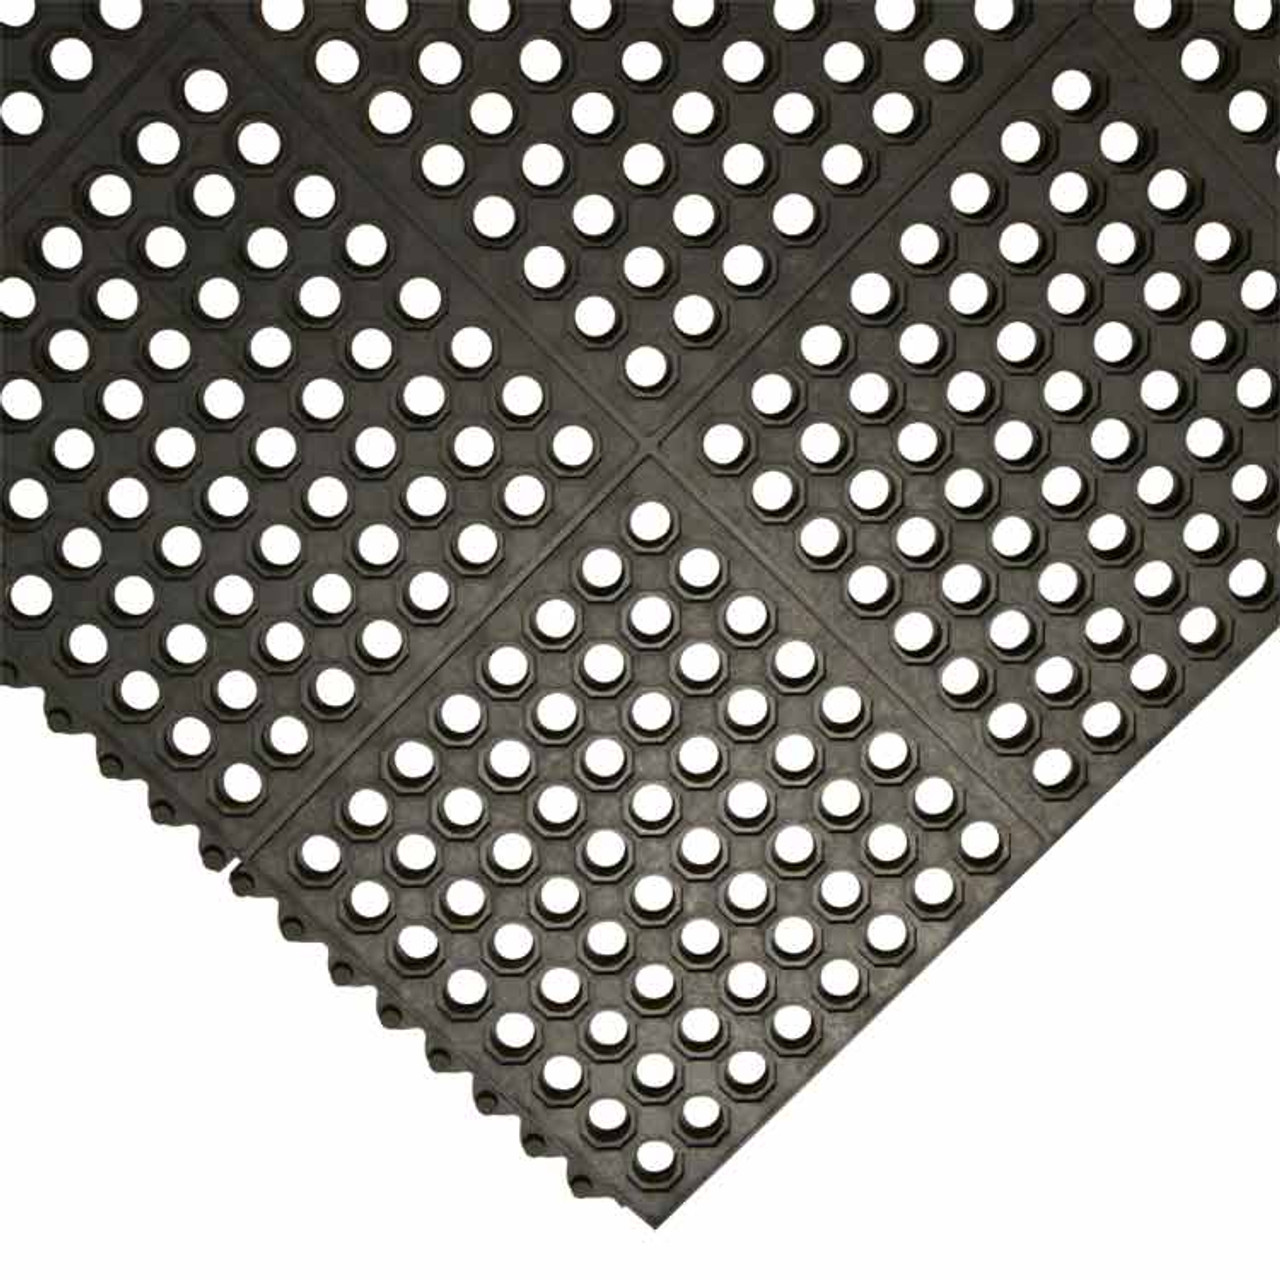 A Rubber Drainage Mat Offers Three Degrees of Slip-Resistant Safety!